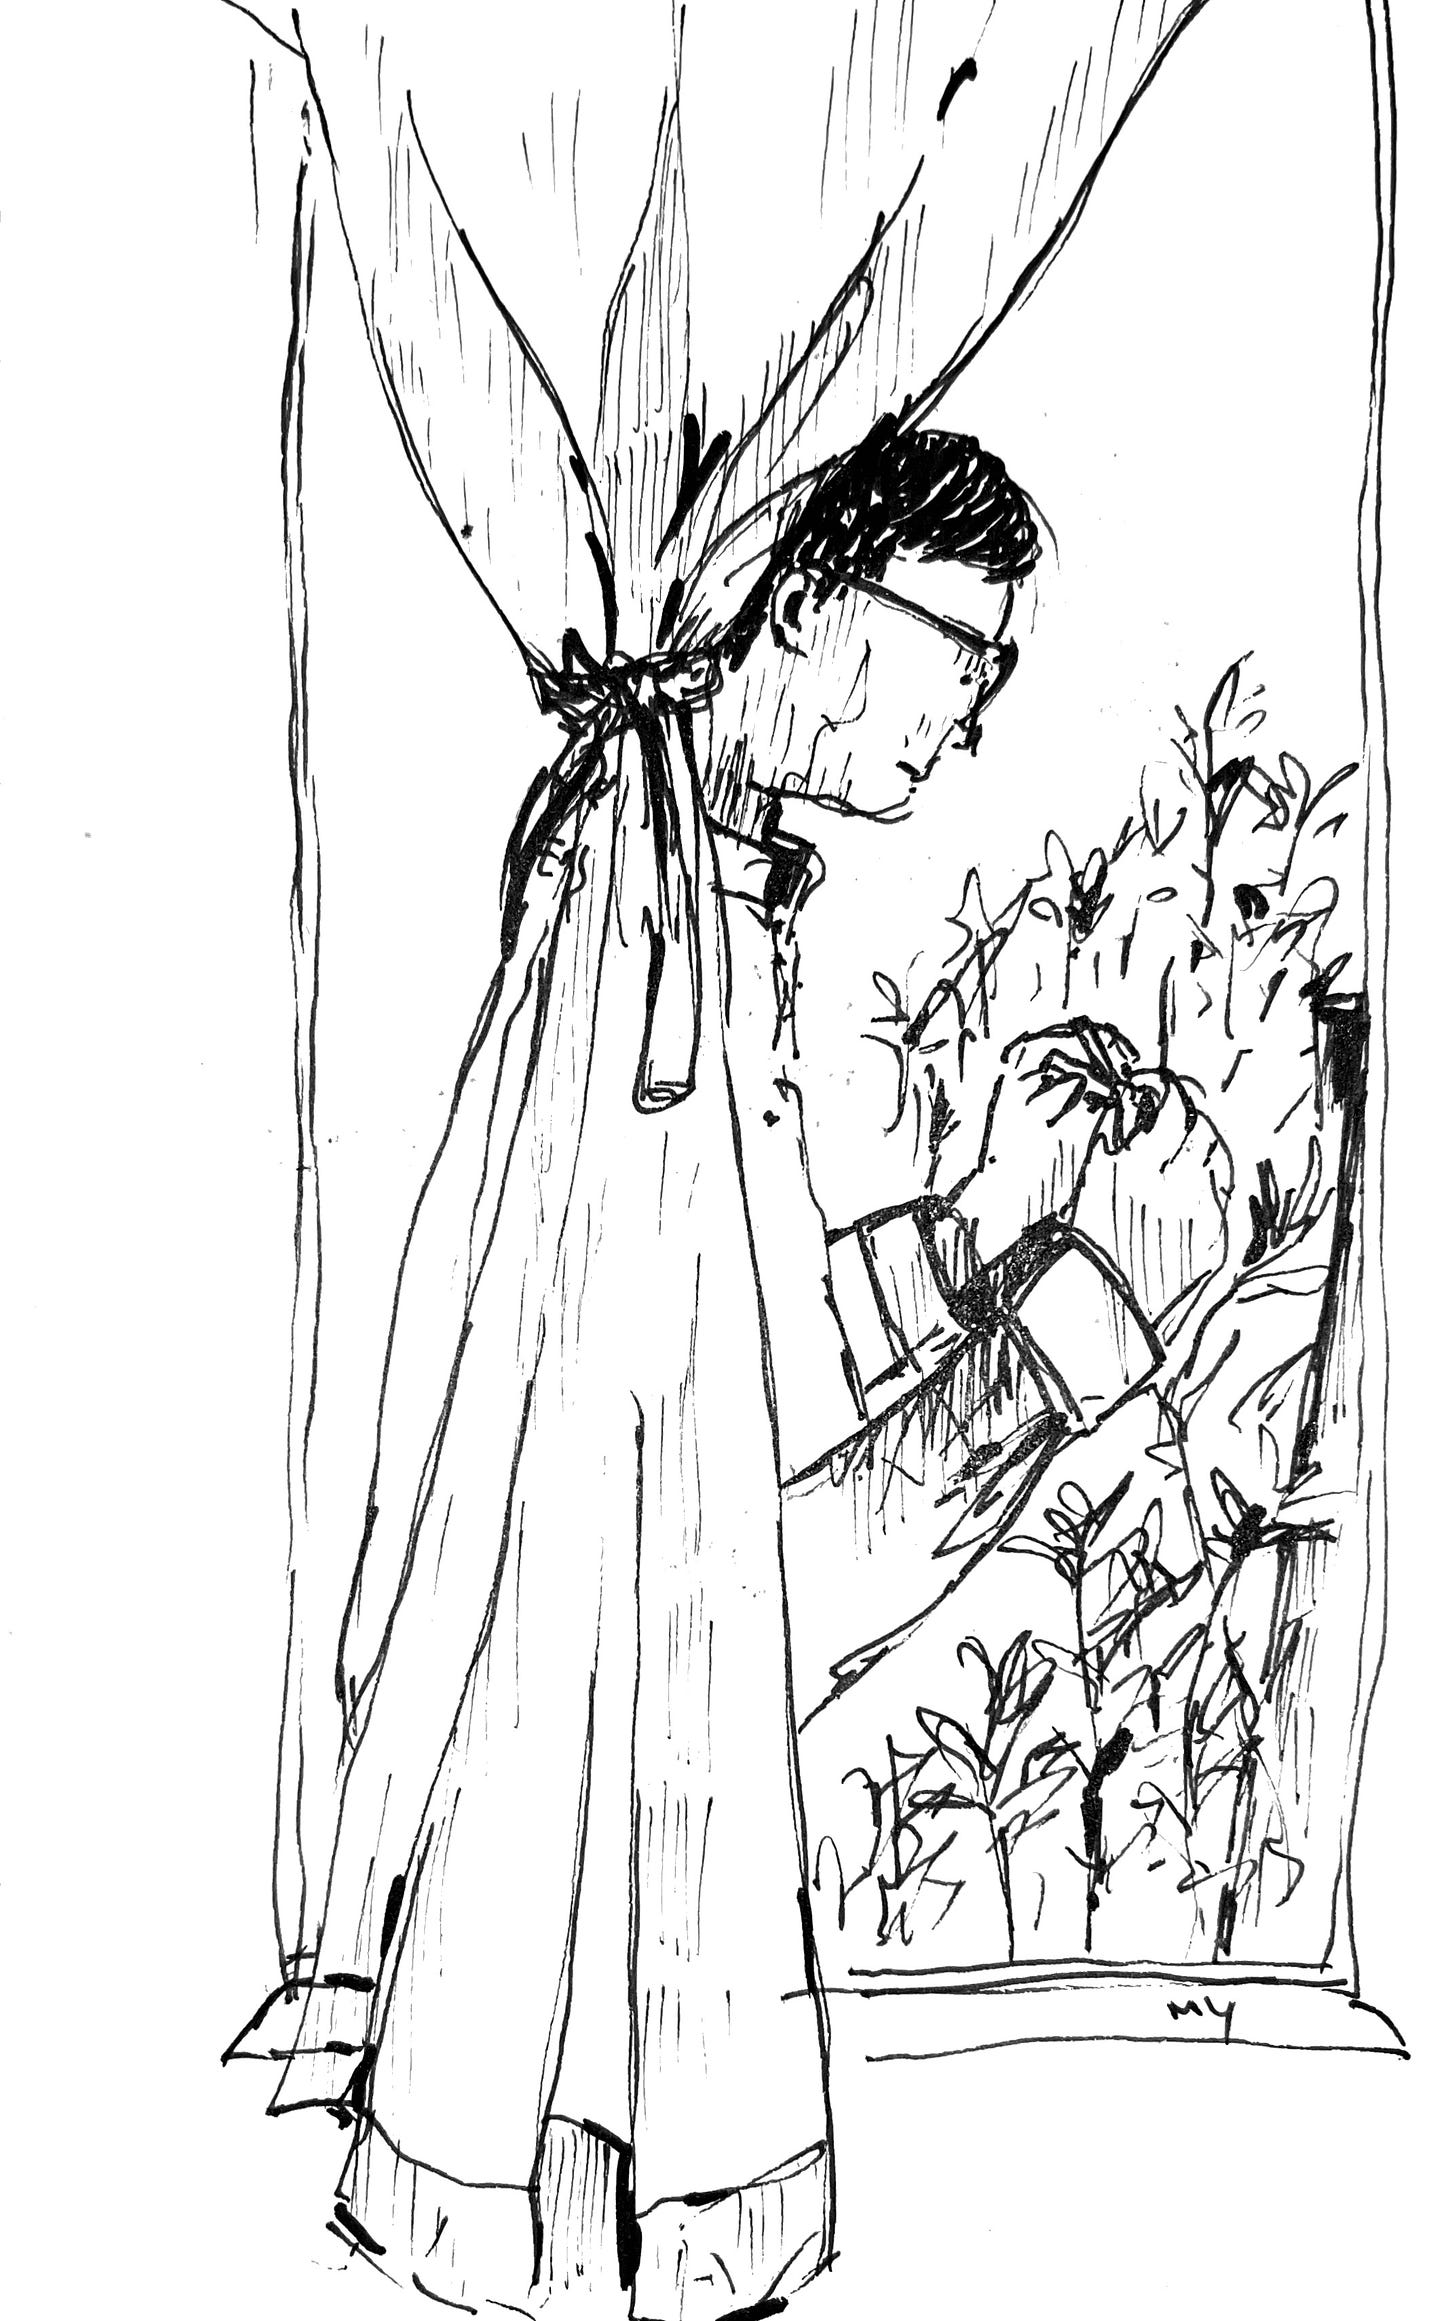 Image: A sketch with a black fine liner pen of a man partially seen outside the window with curtains, he’s enjoying the morning breeze on the patio, while trimming his fingernails.